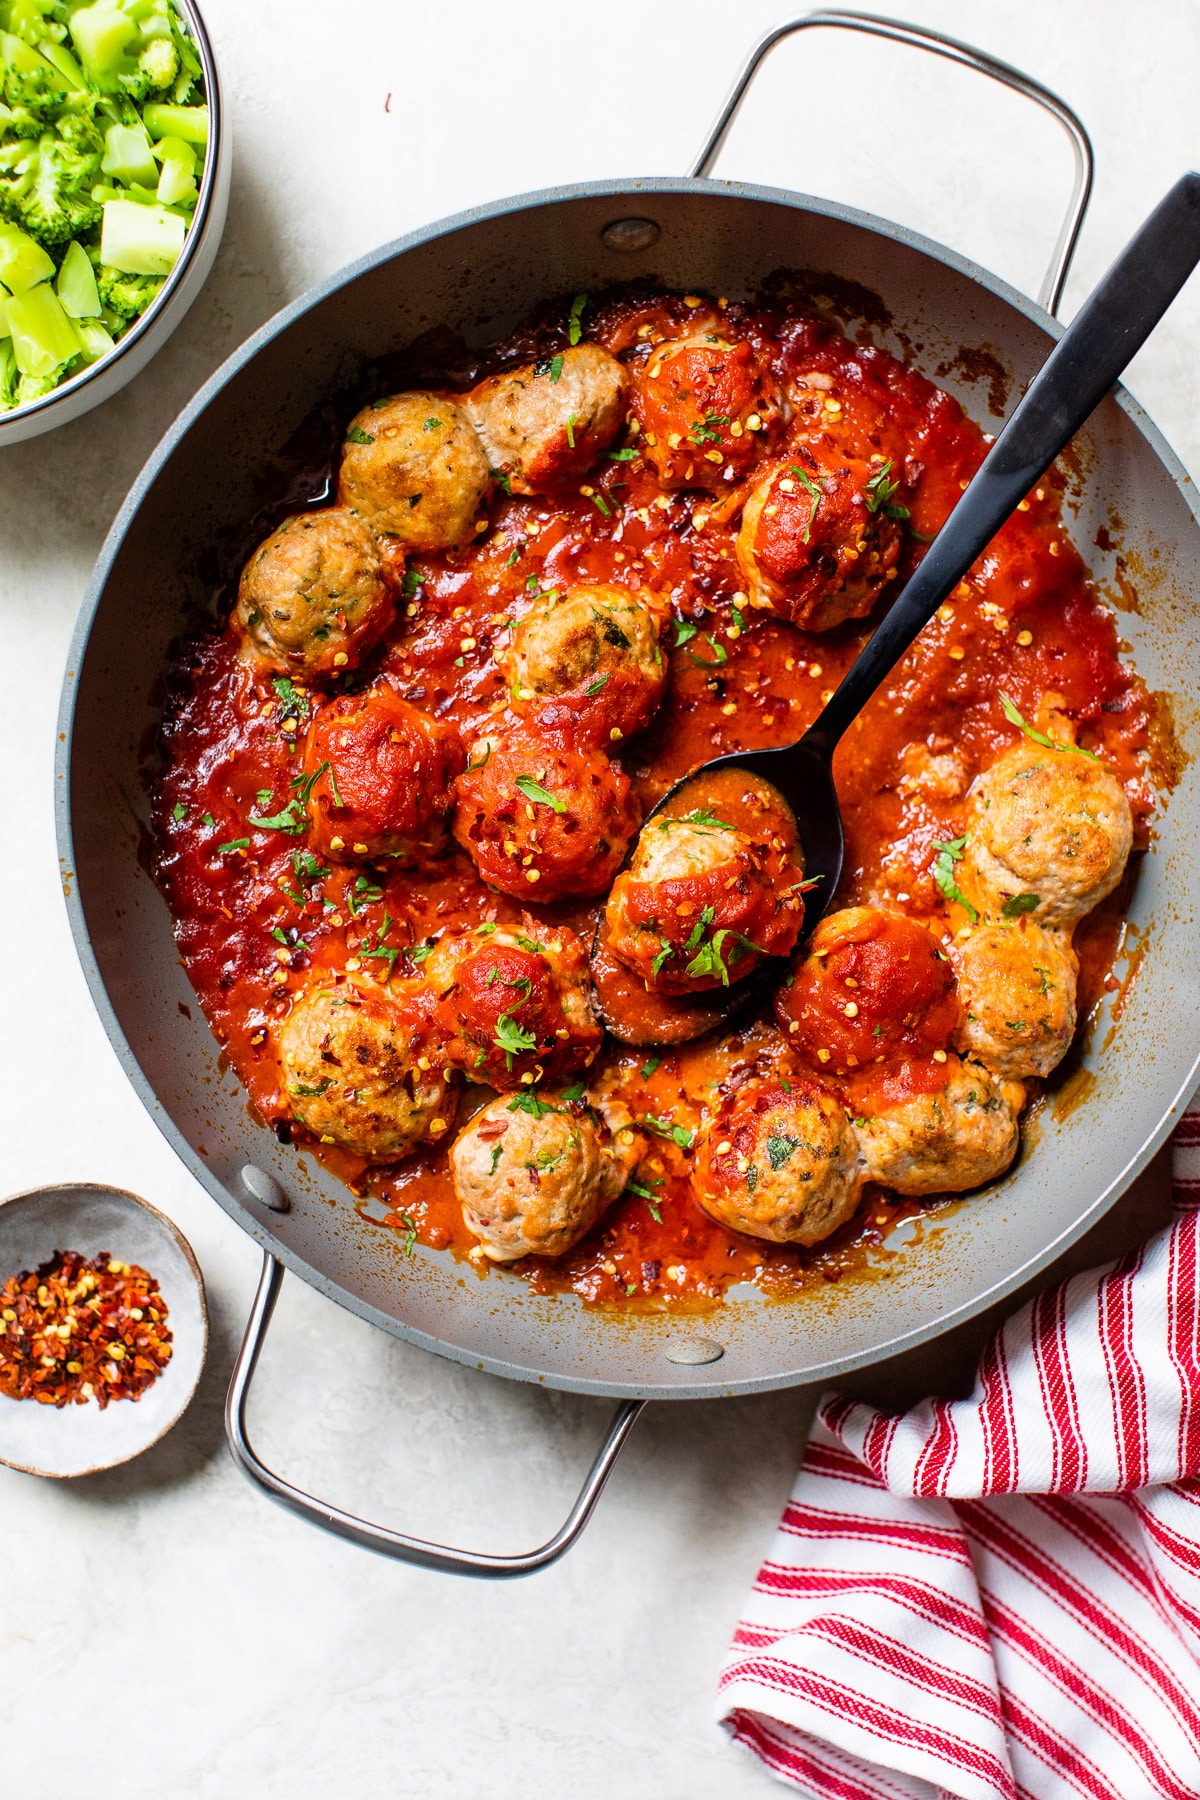 skillet with meatballs and broccoli beside it